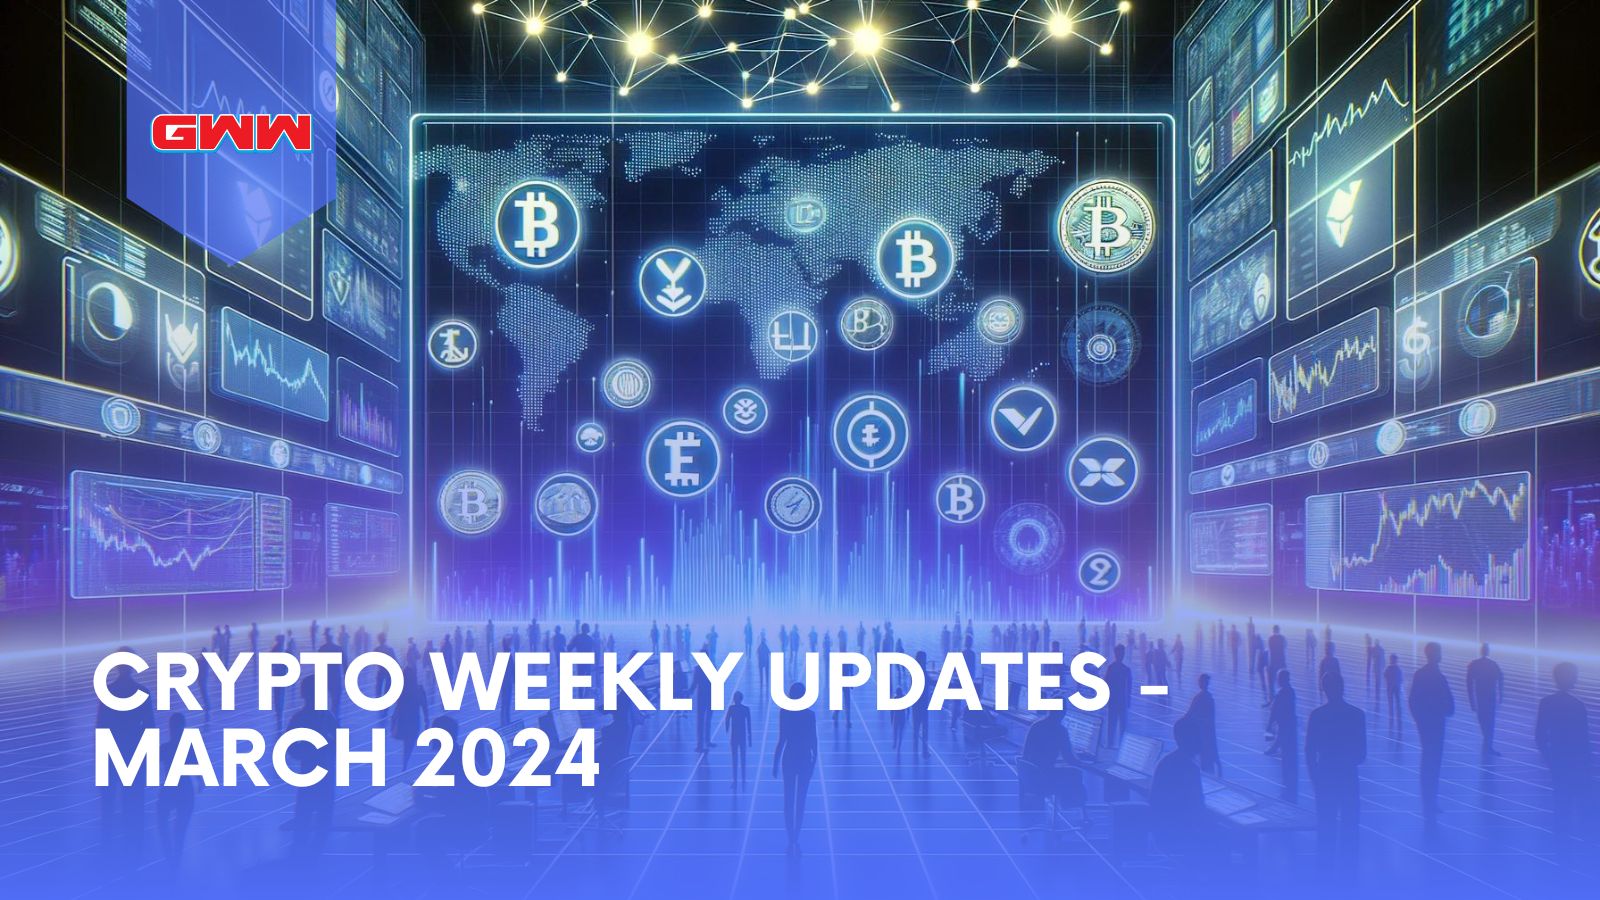 Crypto Weekly Updates - March 2024